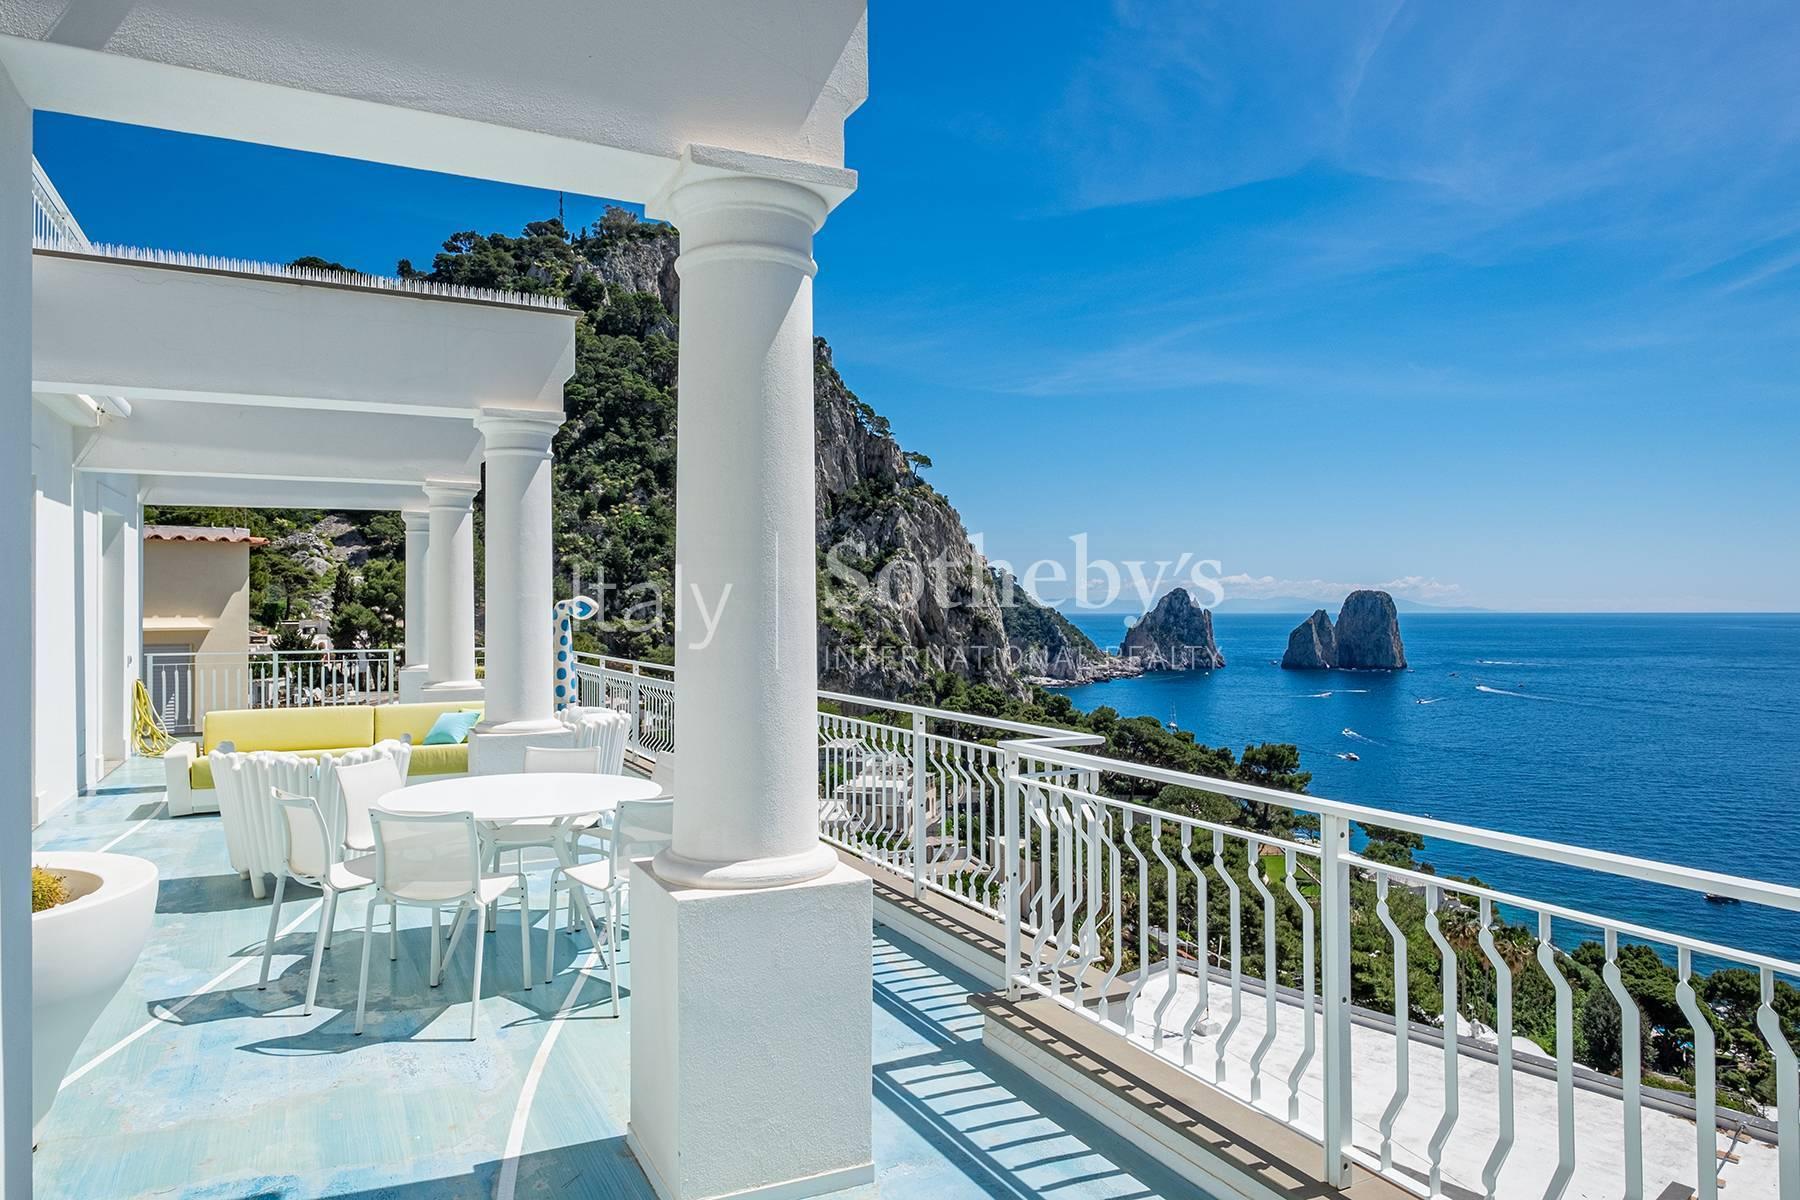 Penthouse with a breath taking view on the Faraglioni Rocks - 3